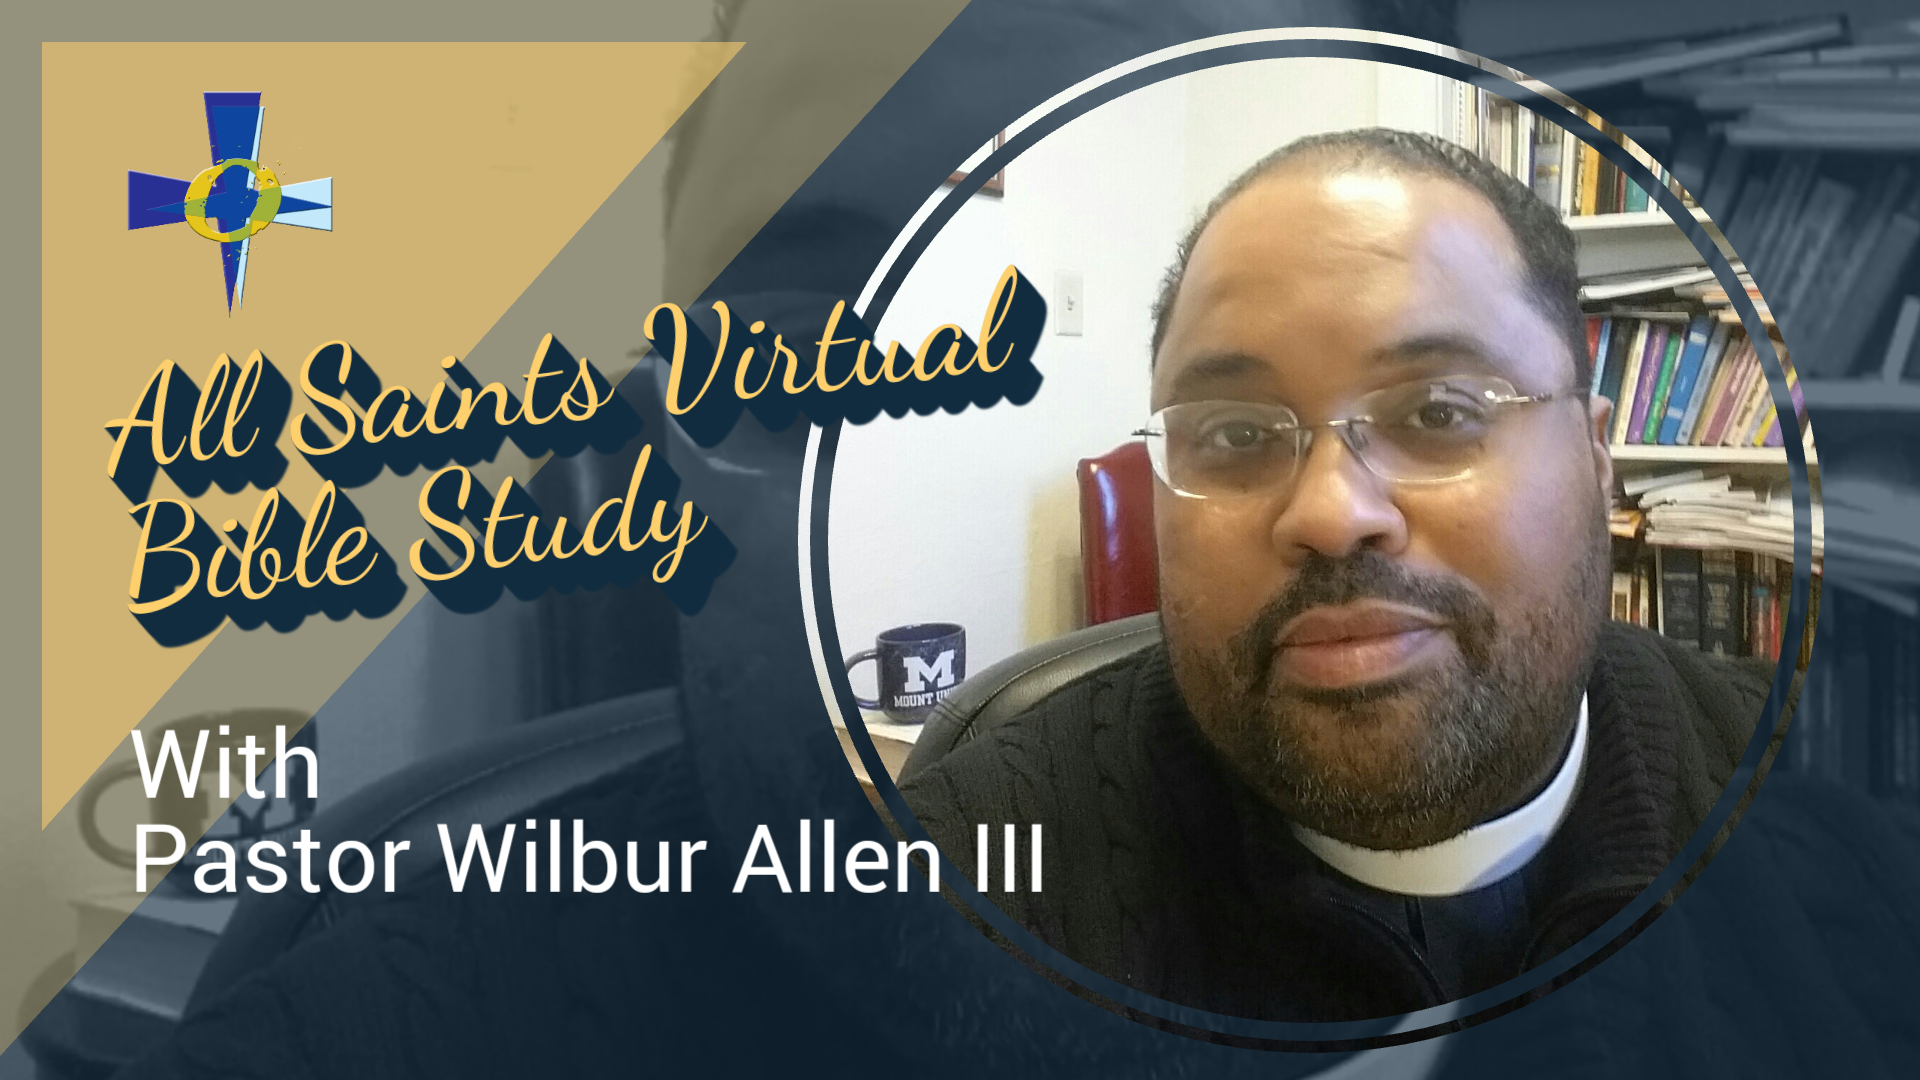 All Saints Virtual Bible Study - The Value of Time